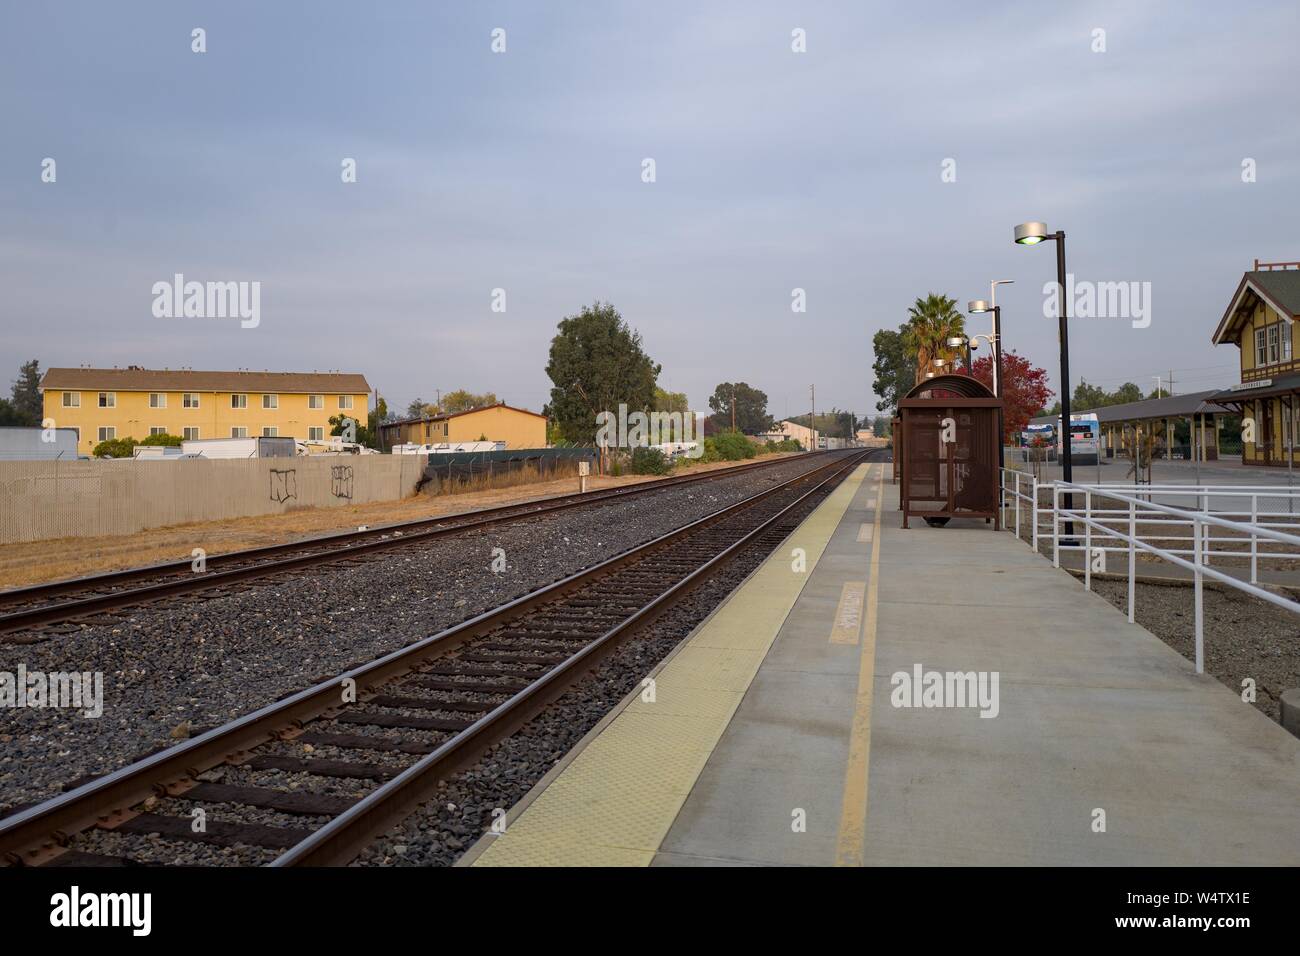 Station platform at Livermore-Lavta railroad station of the Altamont Corridor Express, a regional rail line serving Sacramento and portions of Northern California, in Livermore, California, November 19, 2018. () Stock Photo